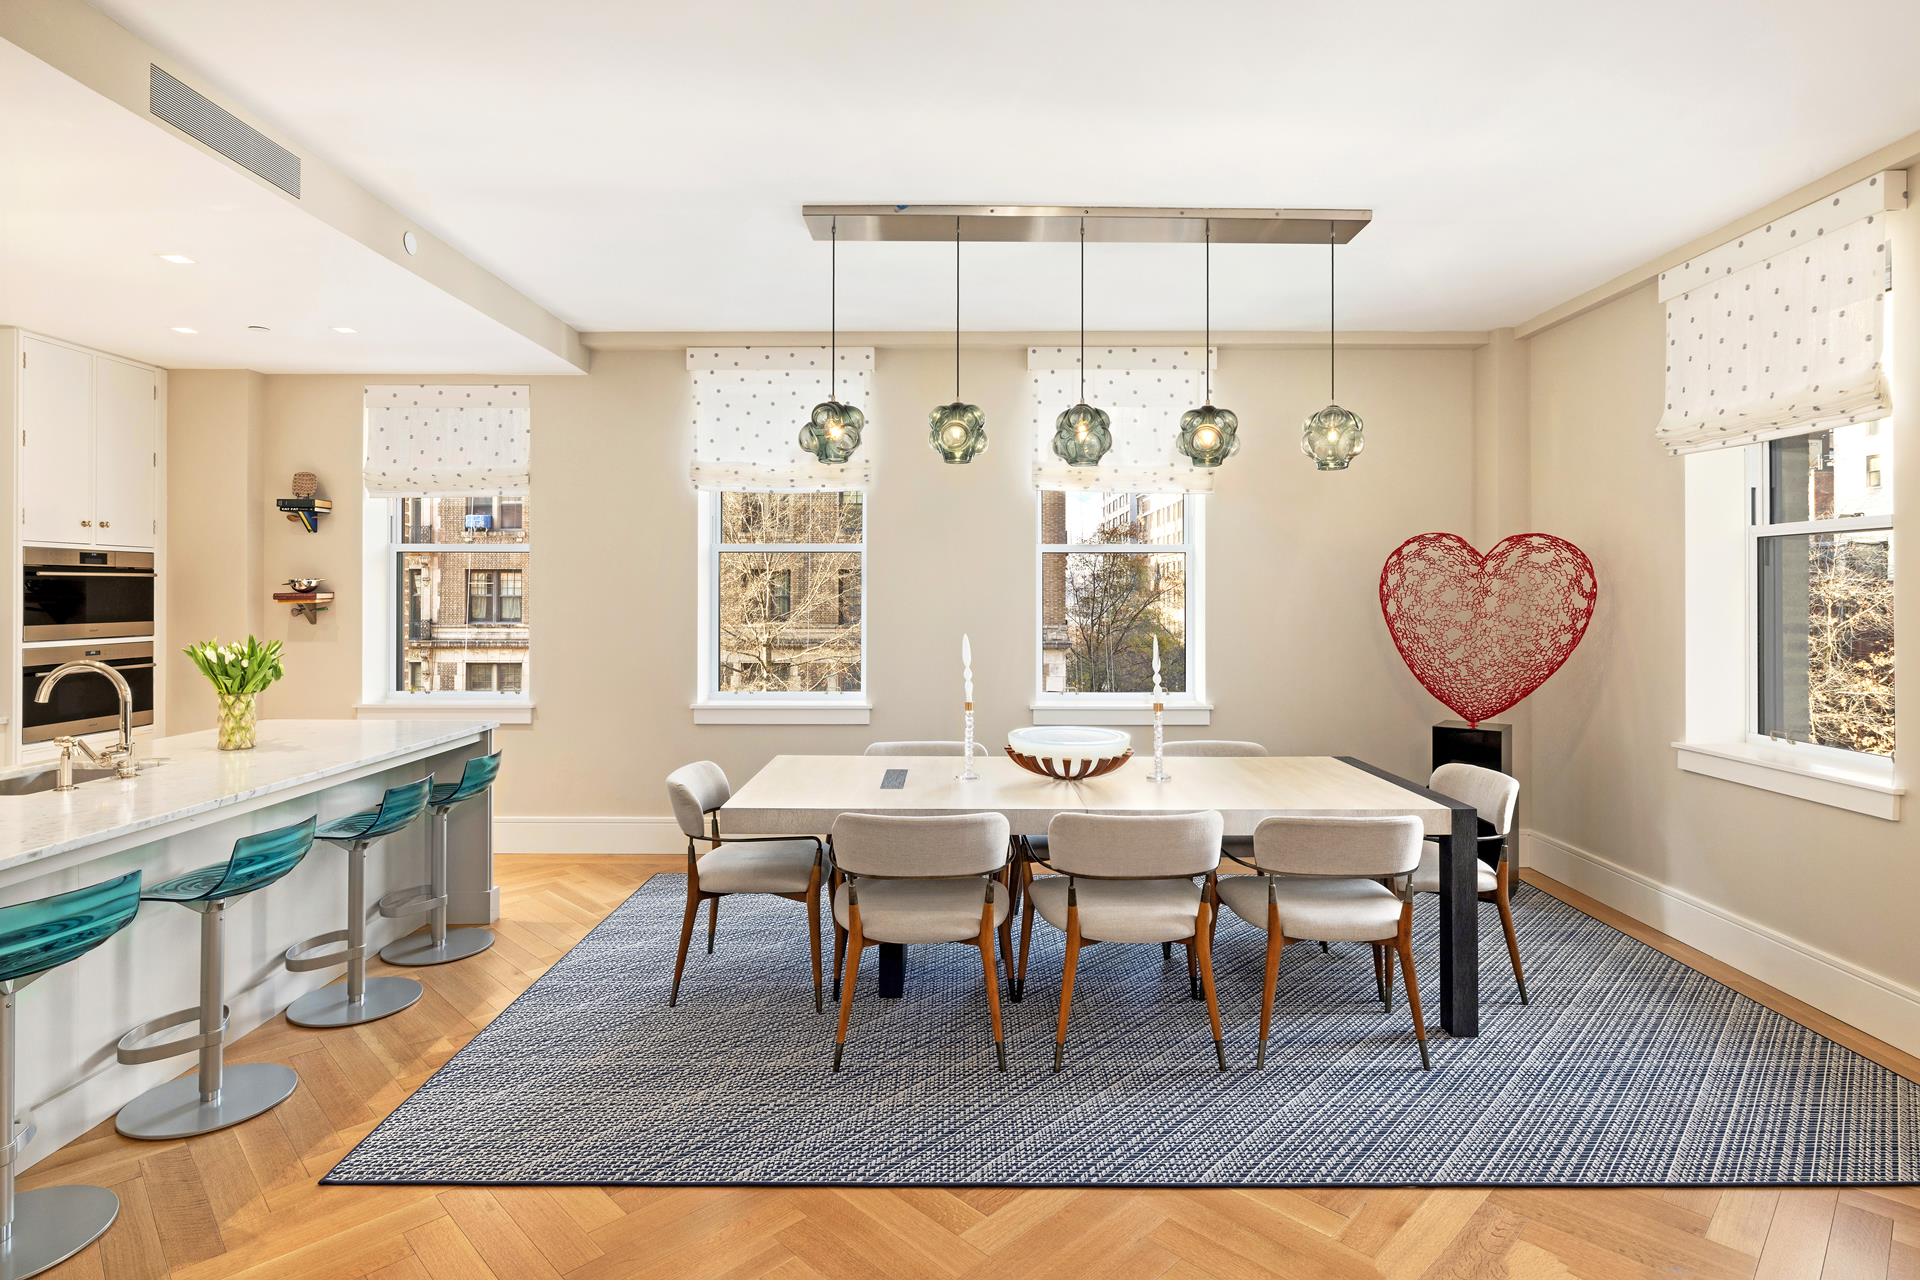 378 West End Avenue 4A, Upper West Side, Upper West Side, NYC - 4 Bedrooms  
4.5 Bathrooms  
6 Rooms - 